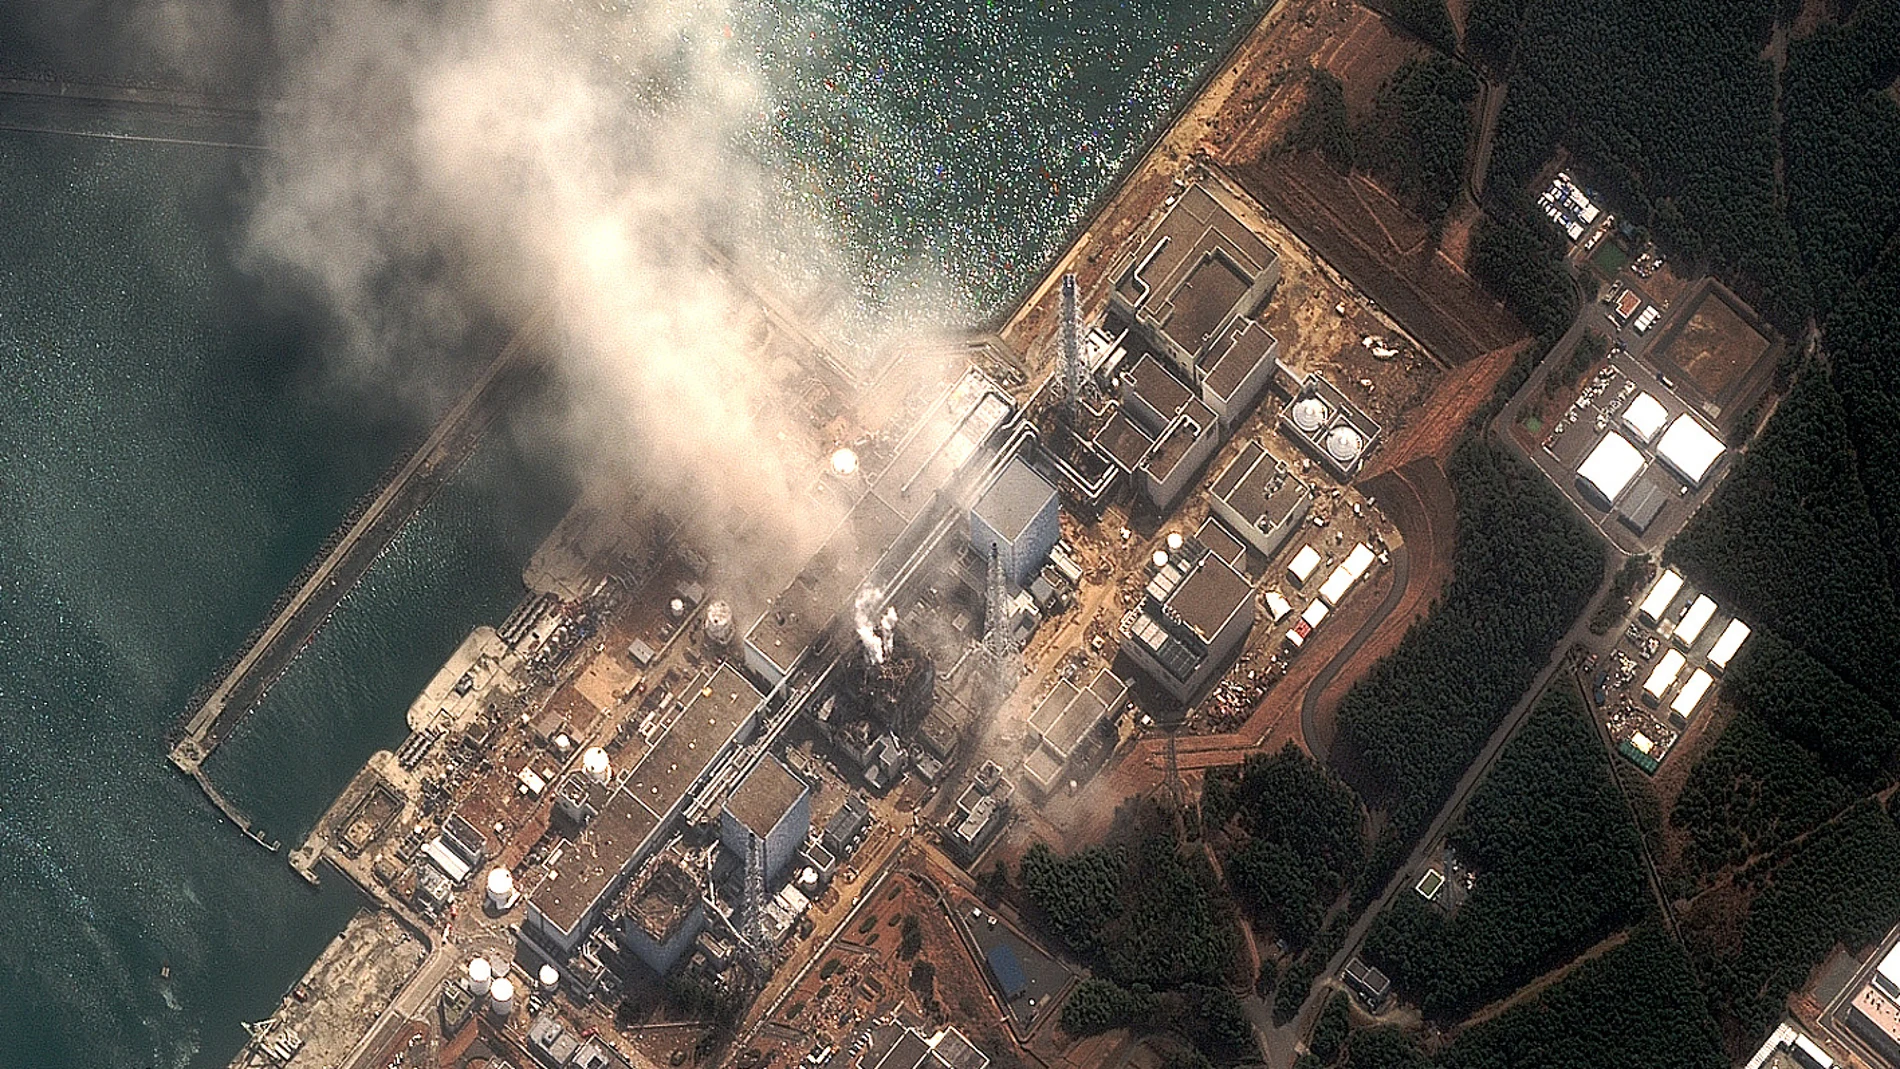 This satellite image provided by DigitalGlobe shows the damaged Fukushima Dai-ichi nuclear facility in Japan on Monday, March 14, 2011. Authorities are strugging to prevent the catastrophic release of radiation in the area devastated by a tsunami. (AP Photo/DigitalGlobe)